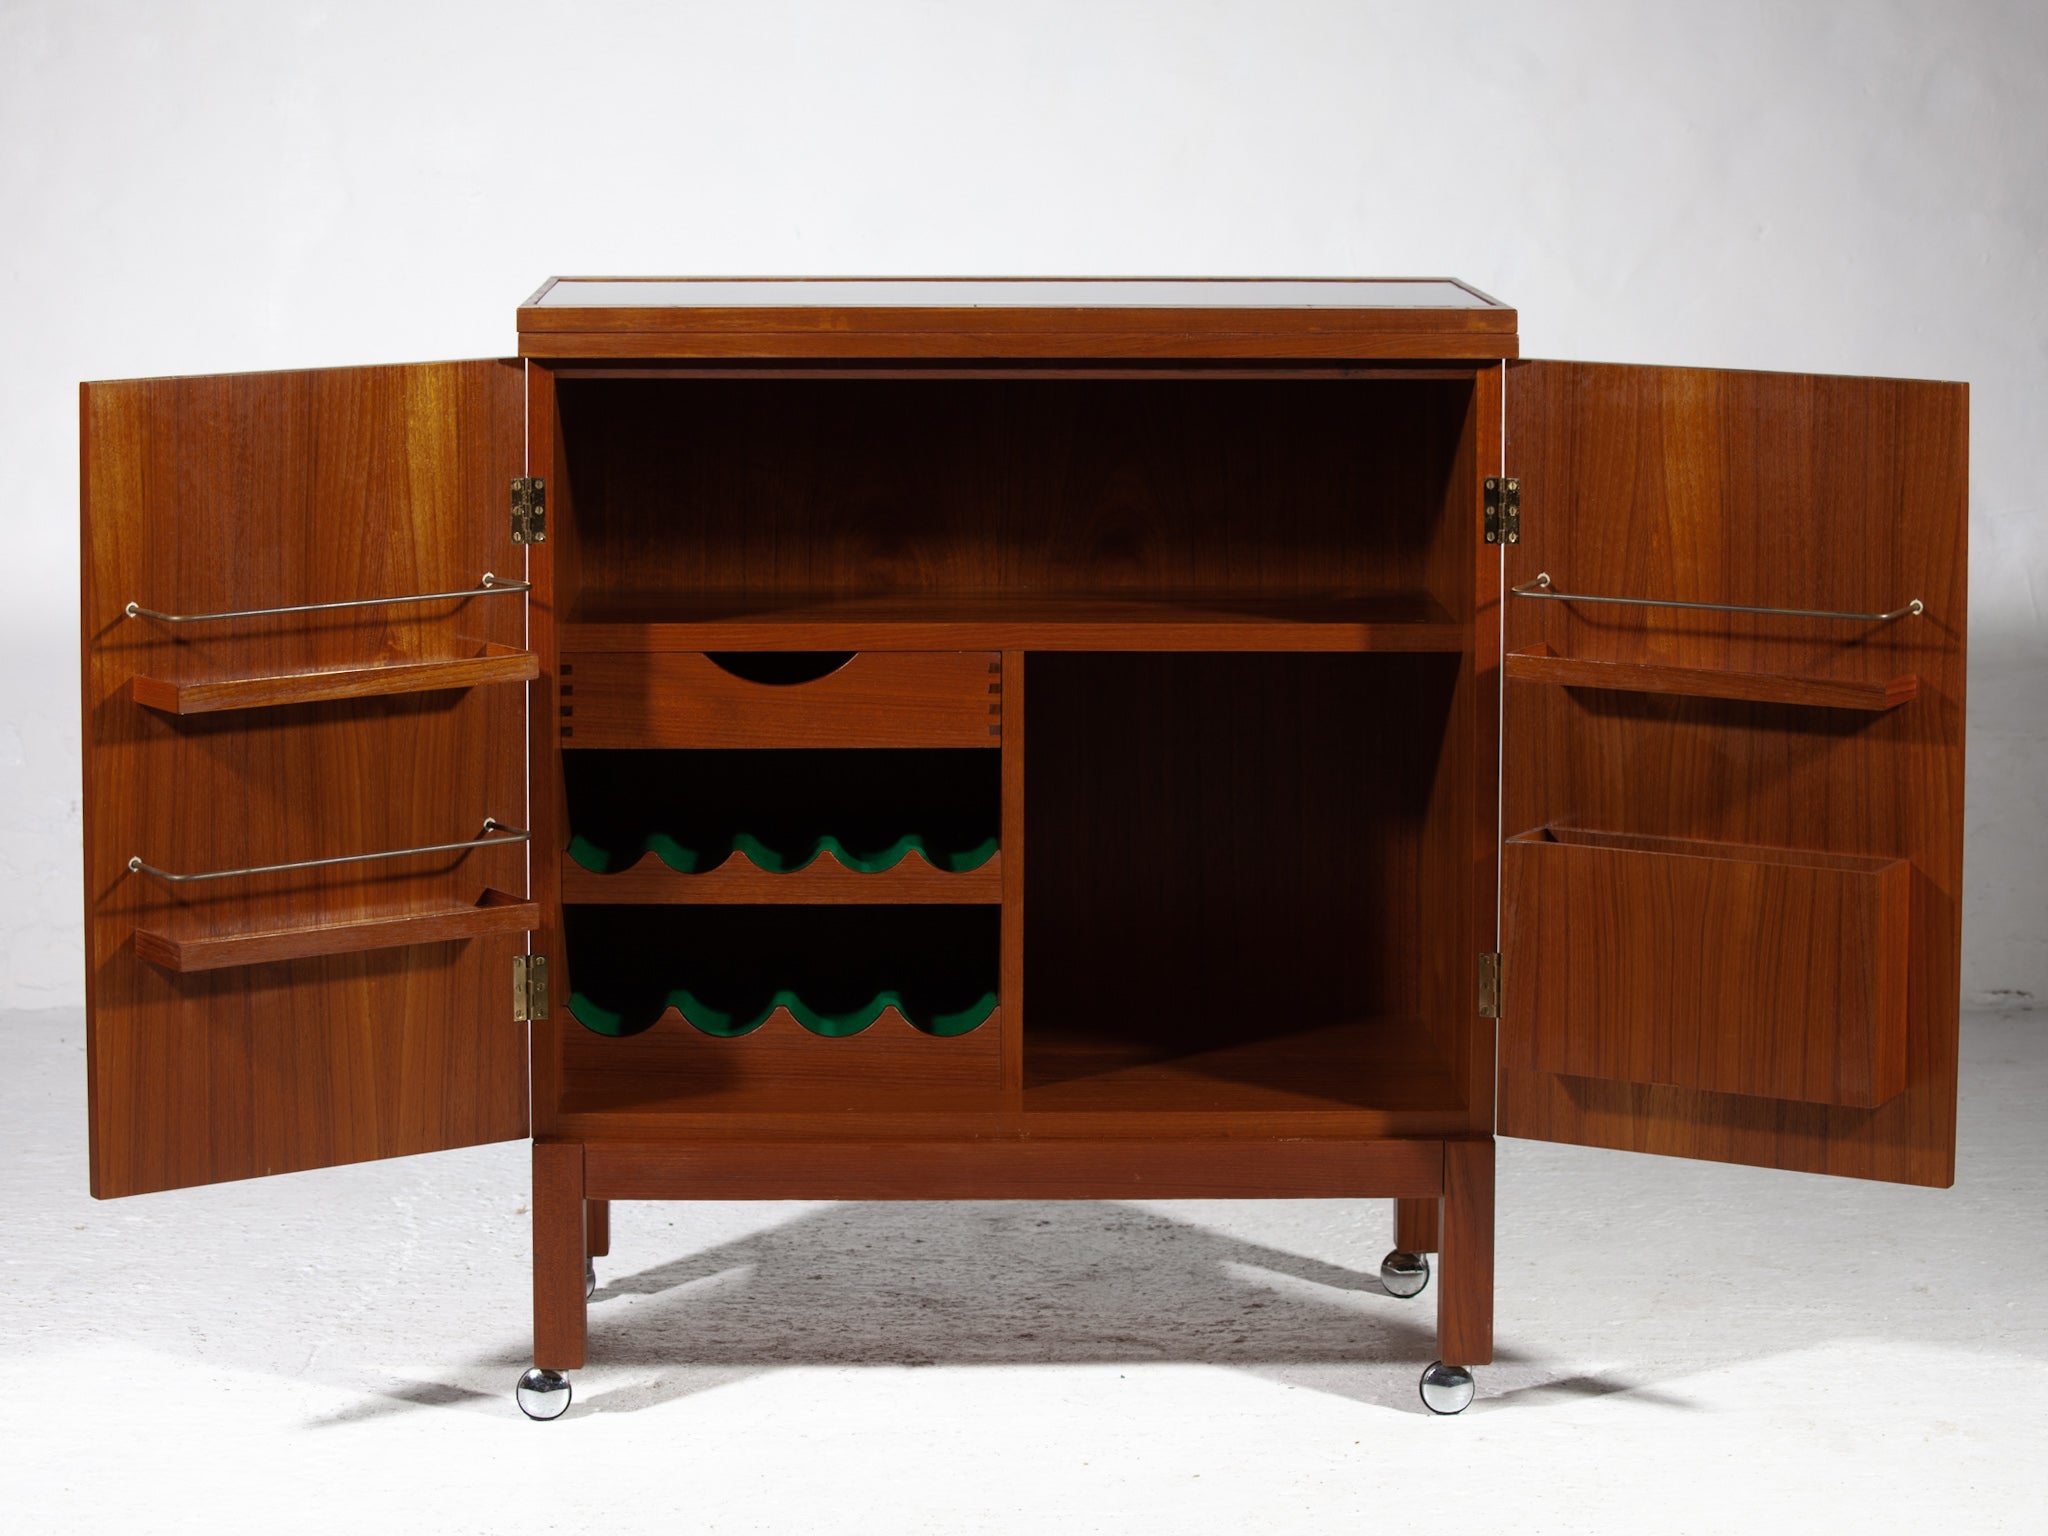 Mid-Century Modern “flip top”, bar cabinet/ cart by Torbjorn Afdal for Mellemstrands Møbelfabrik / Bruksbo of Norway, circa 1960s. 
Featuring in teak, with a fully finished back and teak interior. The finished back side makes this cart ideal for